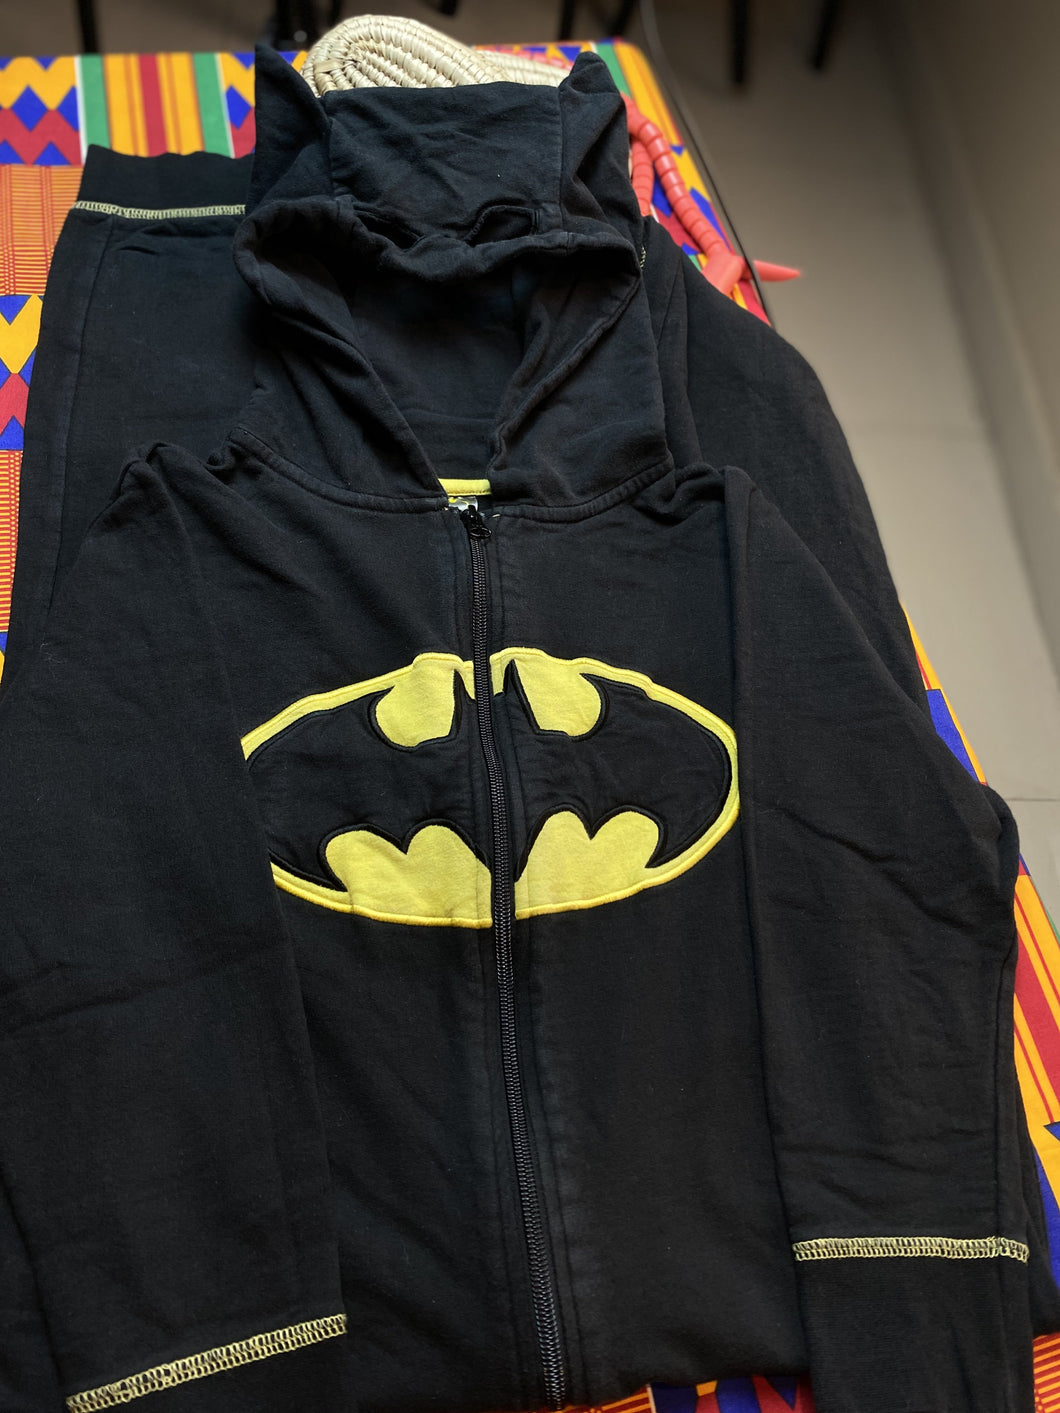 Batman Print Hooded Track suit 5 to 7 years